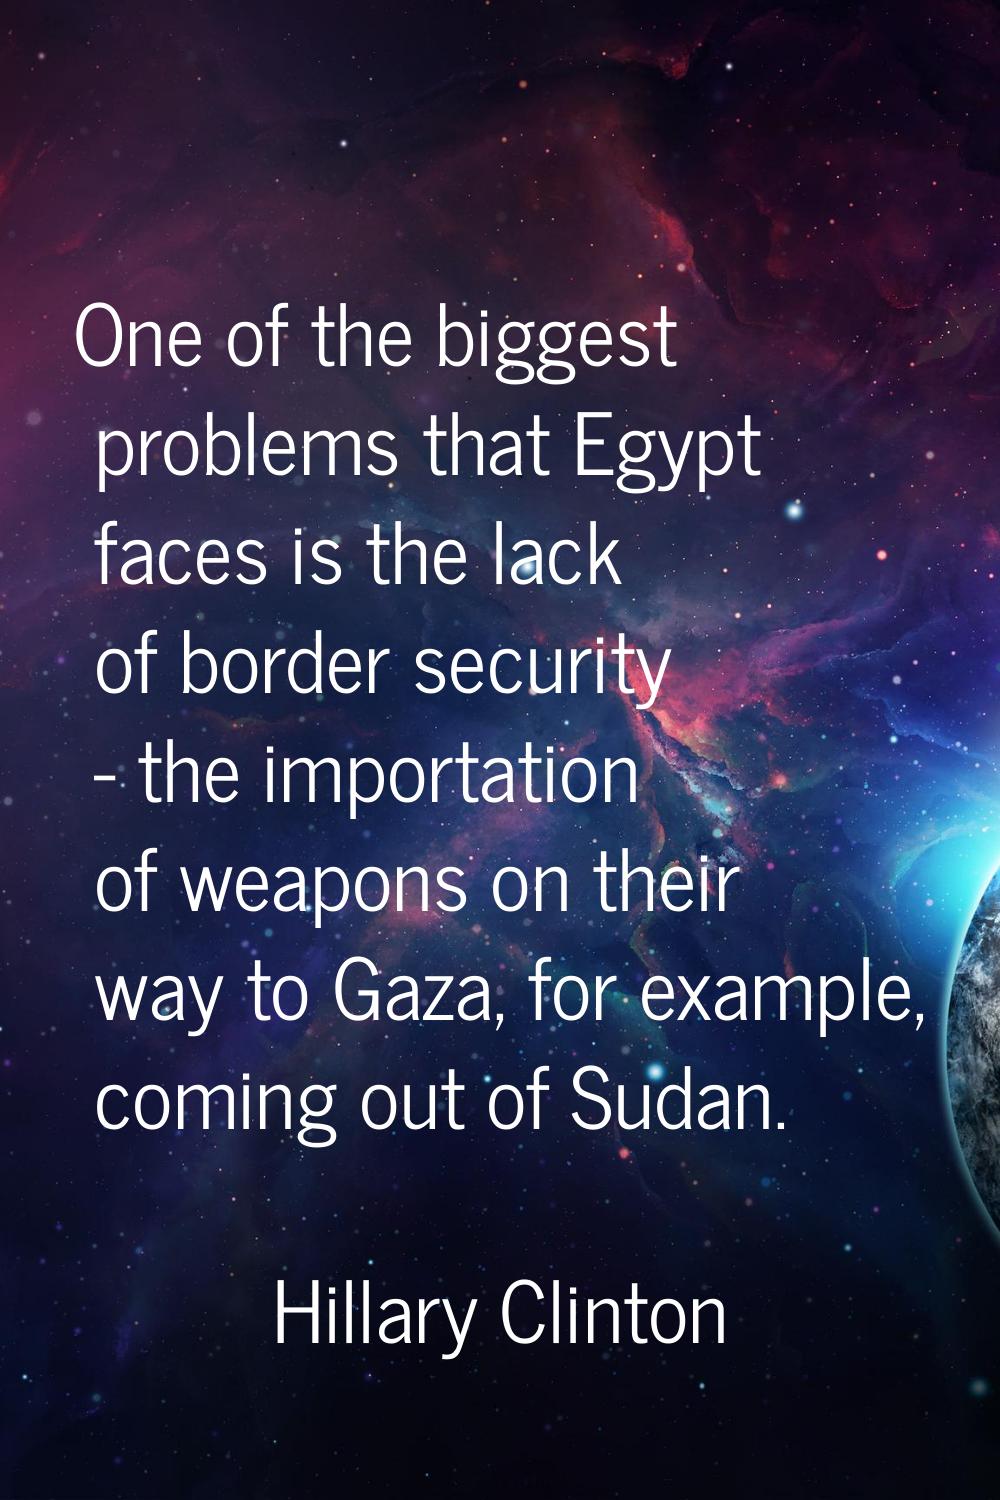 One of the biggest problems that Egypt faces is the lack of border security - the importation of we